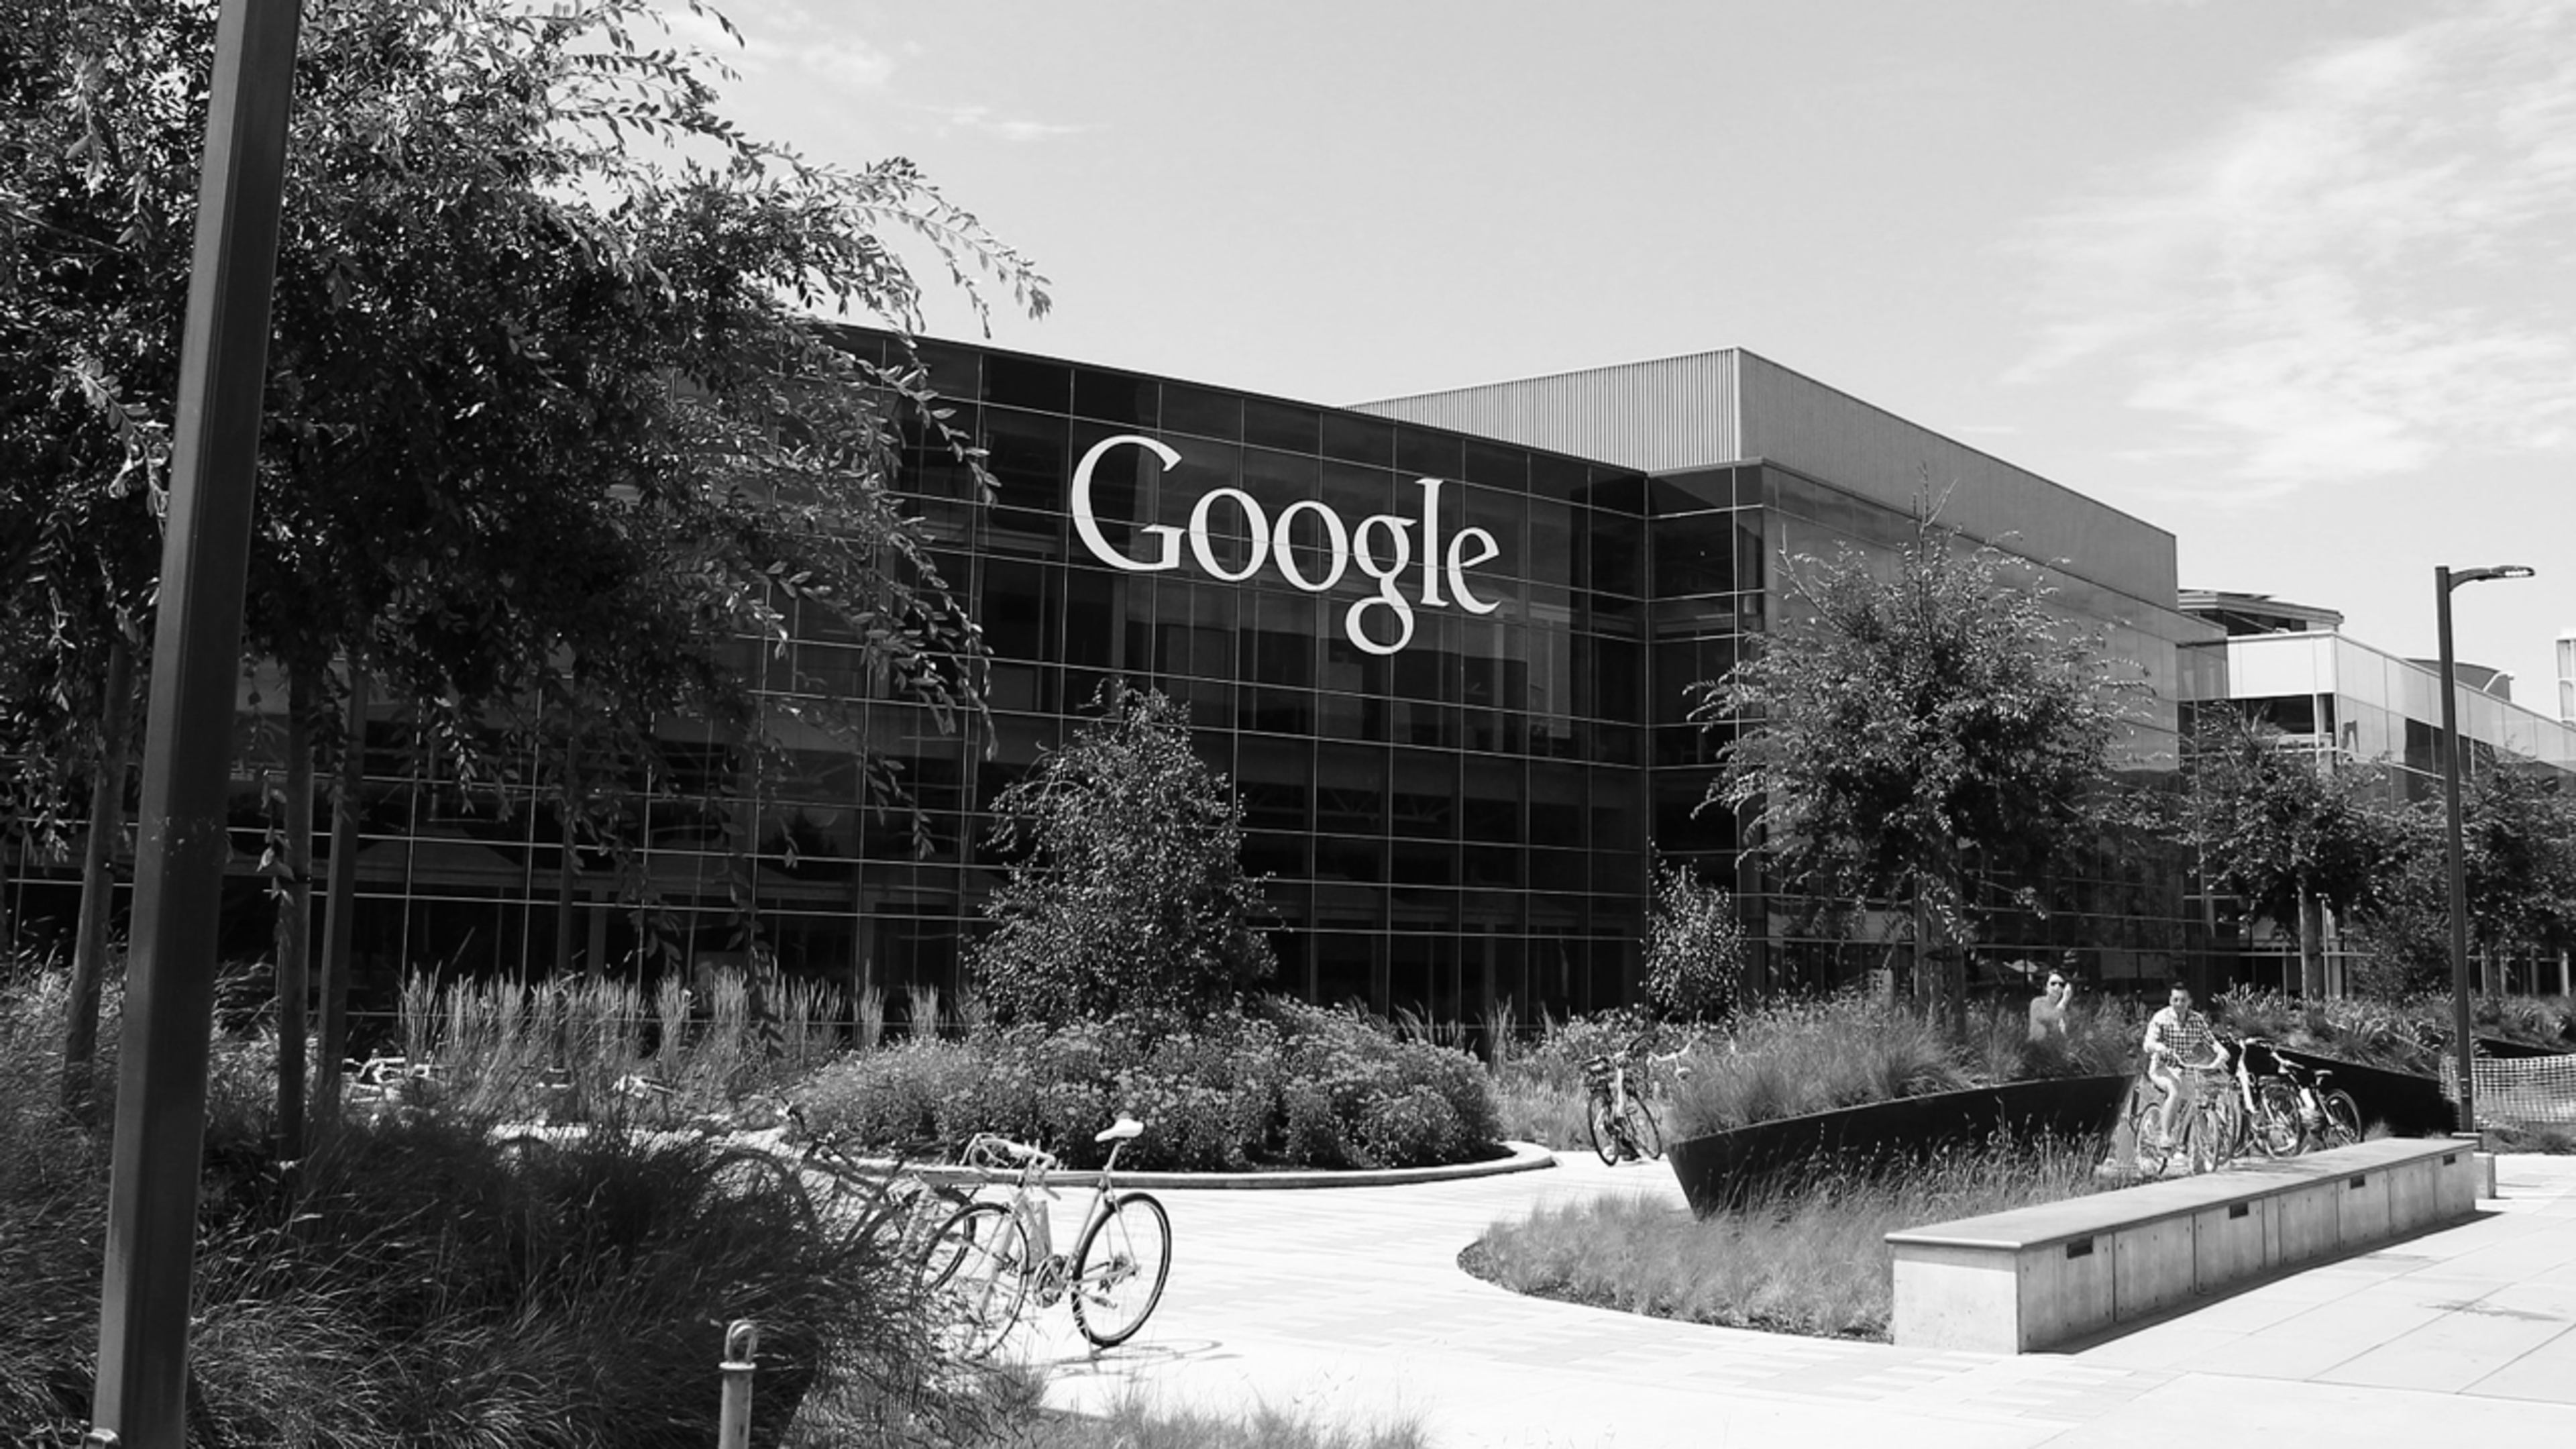 Google requiring all temp and contract workers to get health and parental leave benefits